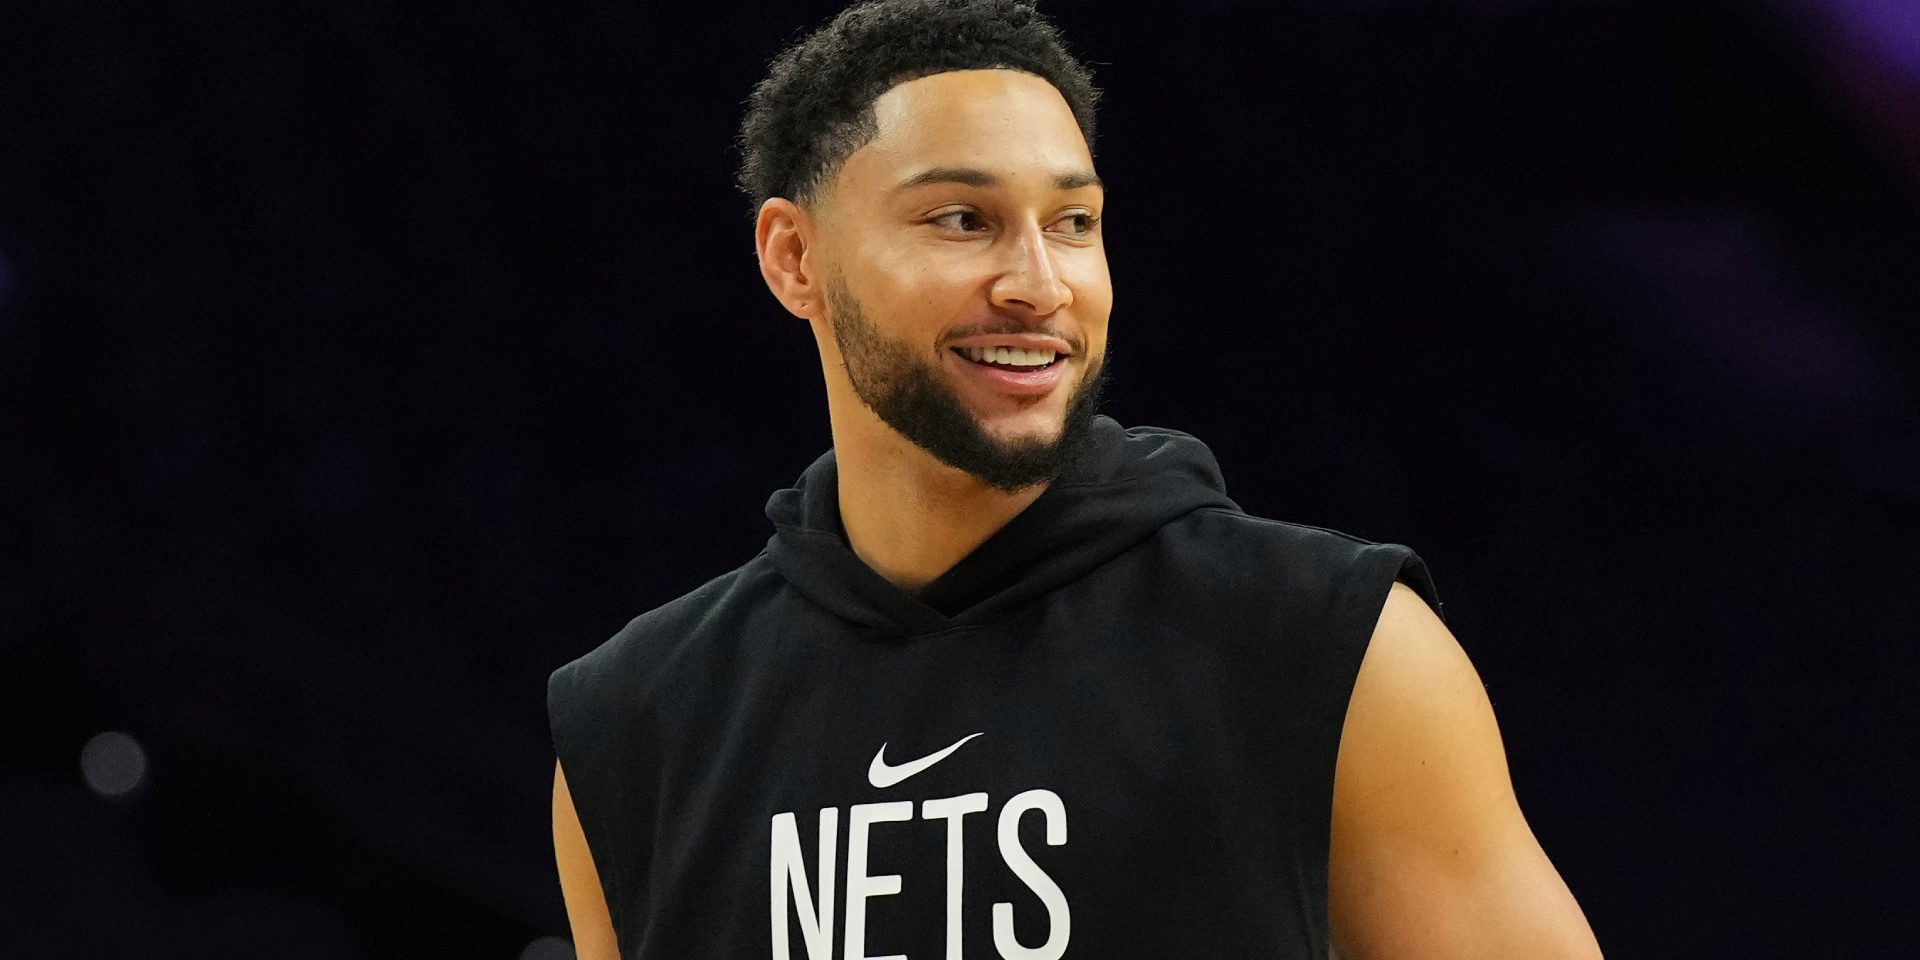 Hold off on Ben Simmons hype: Nets fans should be skeptical with history of offseason workout highlights